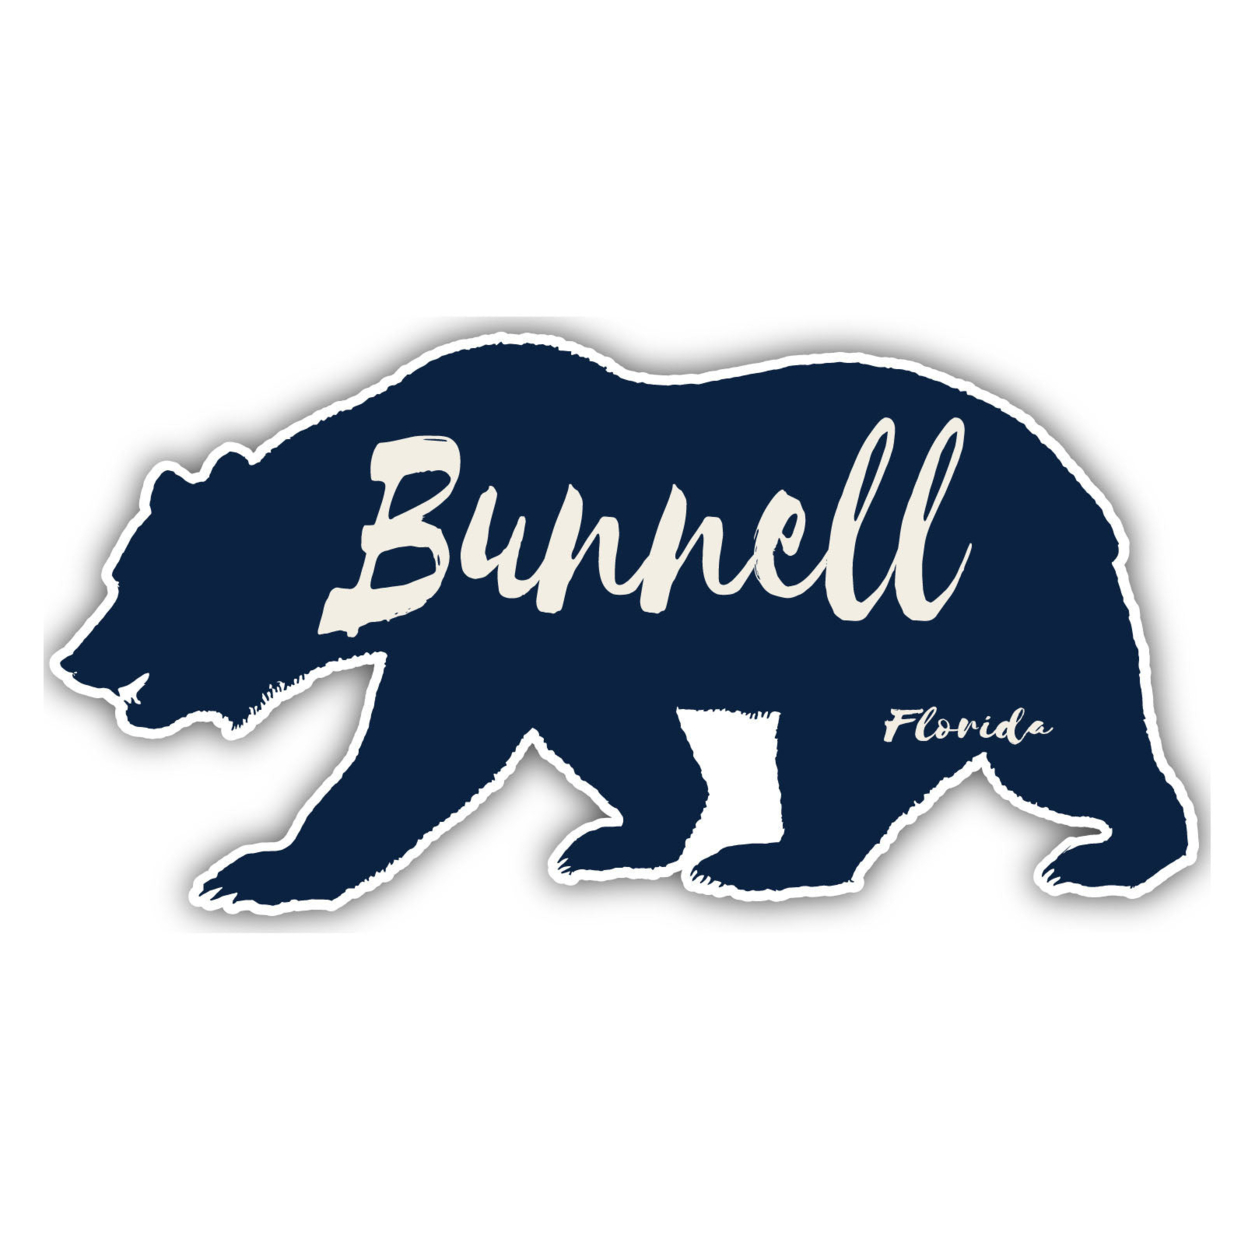 Bunnell Florida Souvenir Decorative Stickers (Choose Theme And Size) - 4-Pack, 8-Inch, Bear